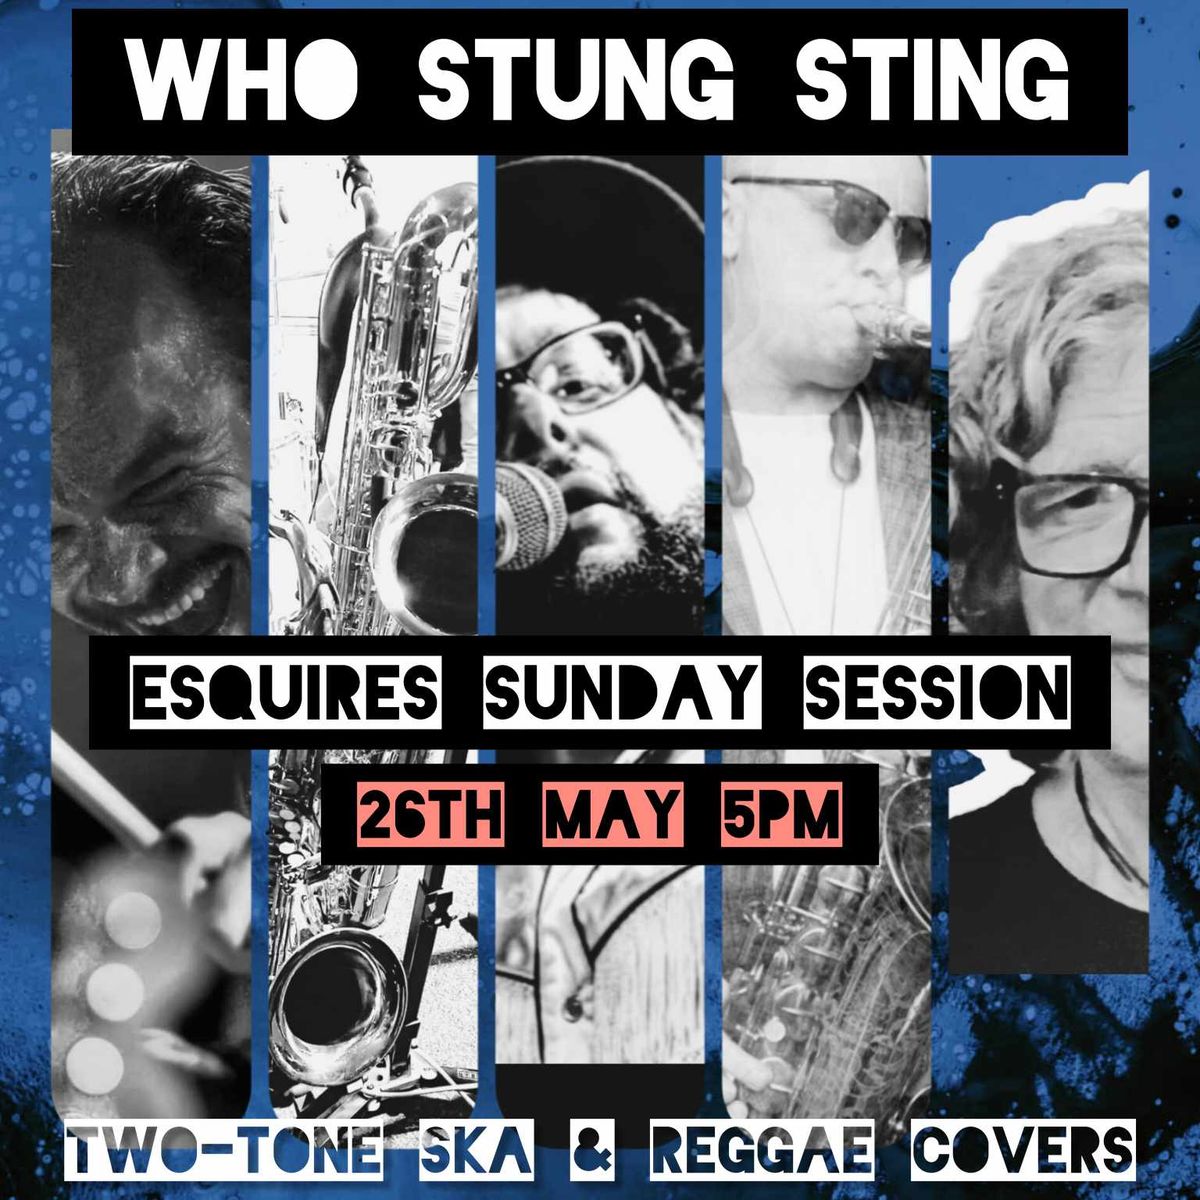 Who Stung Sting play the Sunday Afternoon Session at Bedford Esquires